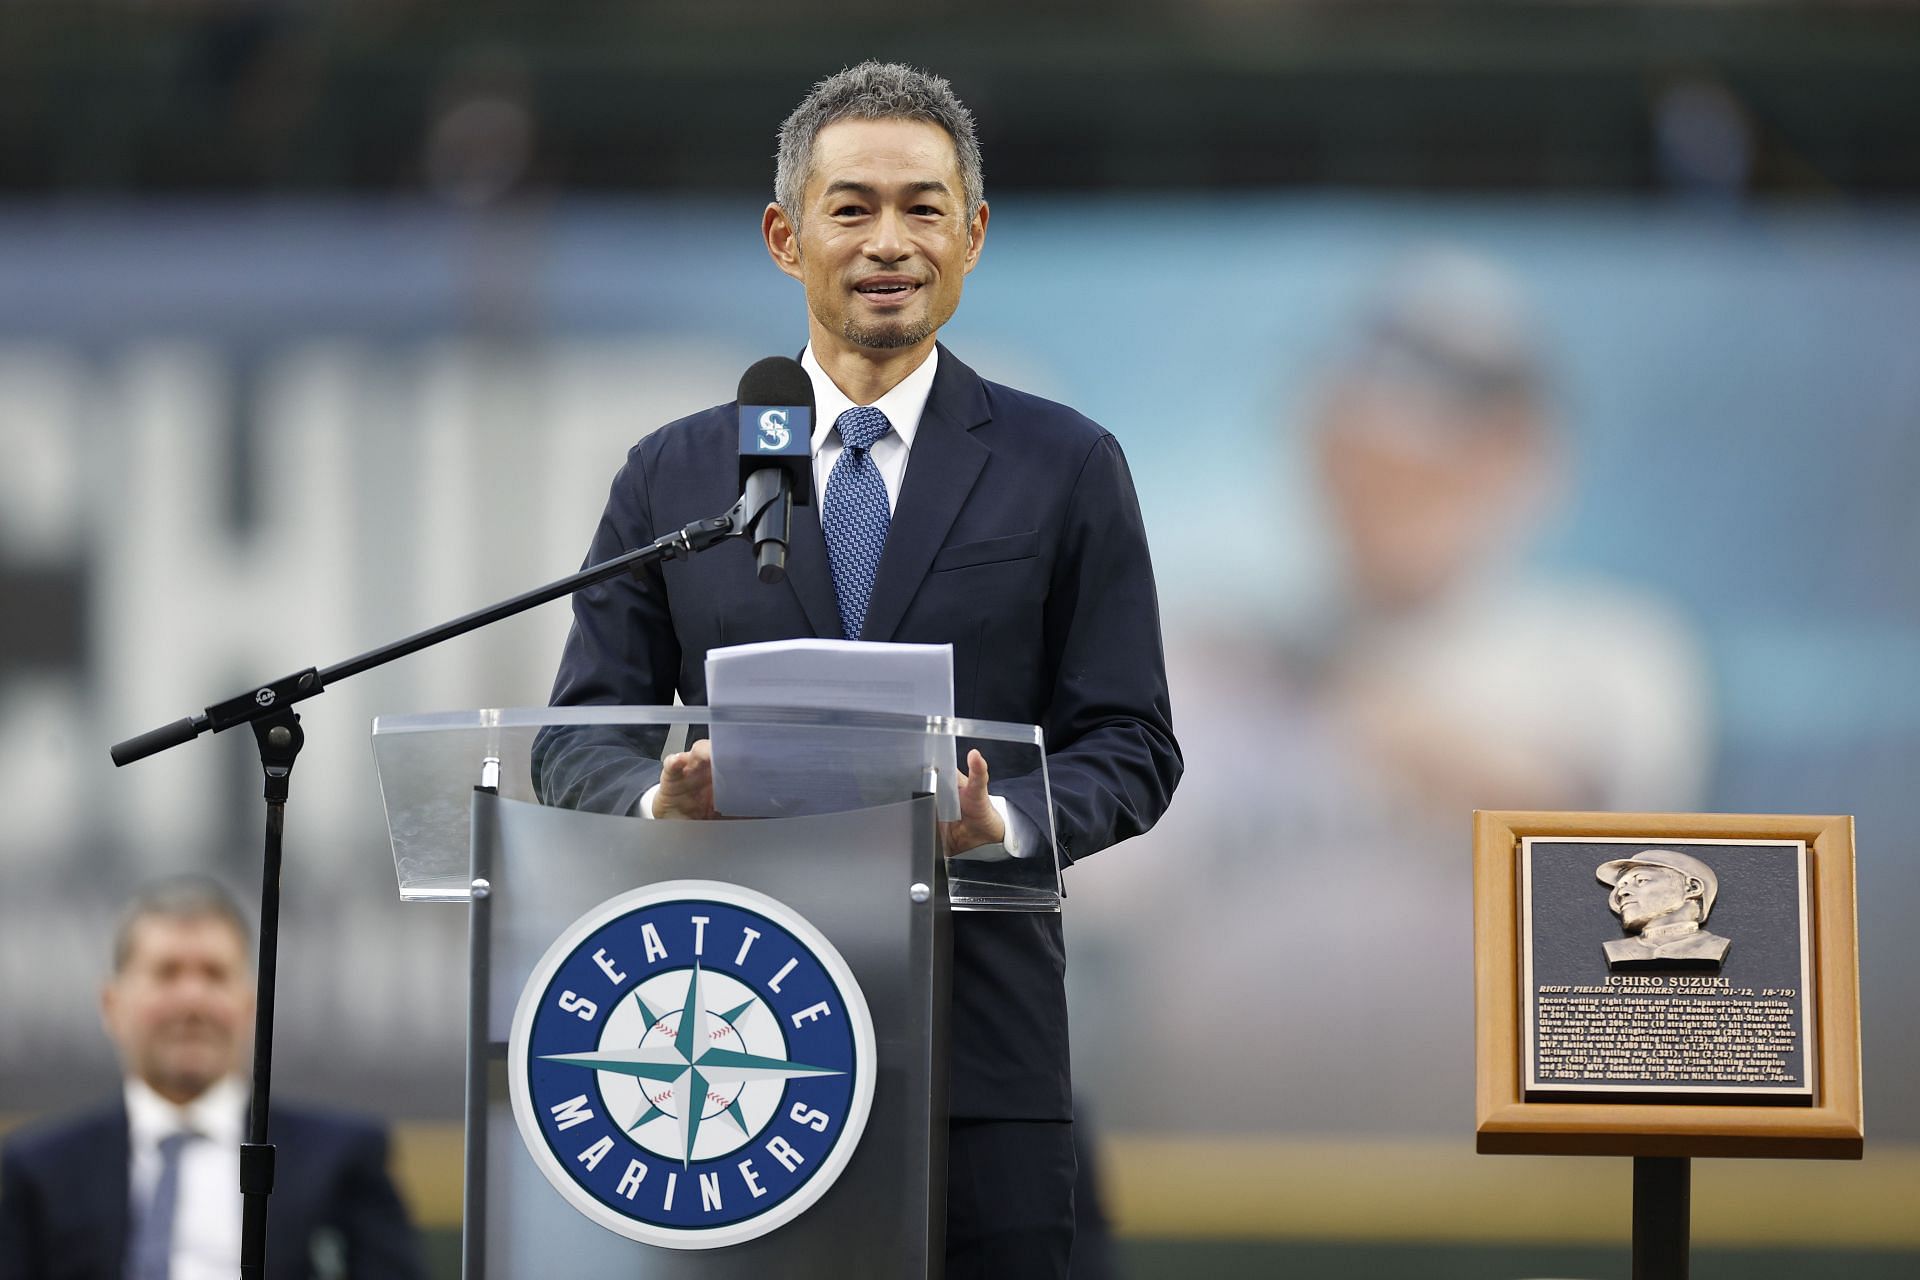 Our best manager since Lou Piniella! (And he might be better than Piniella)  : r/Mariners